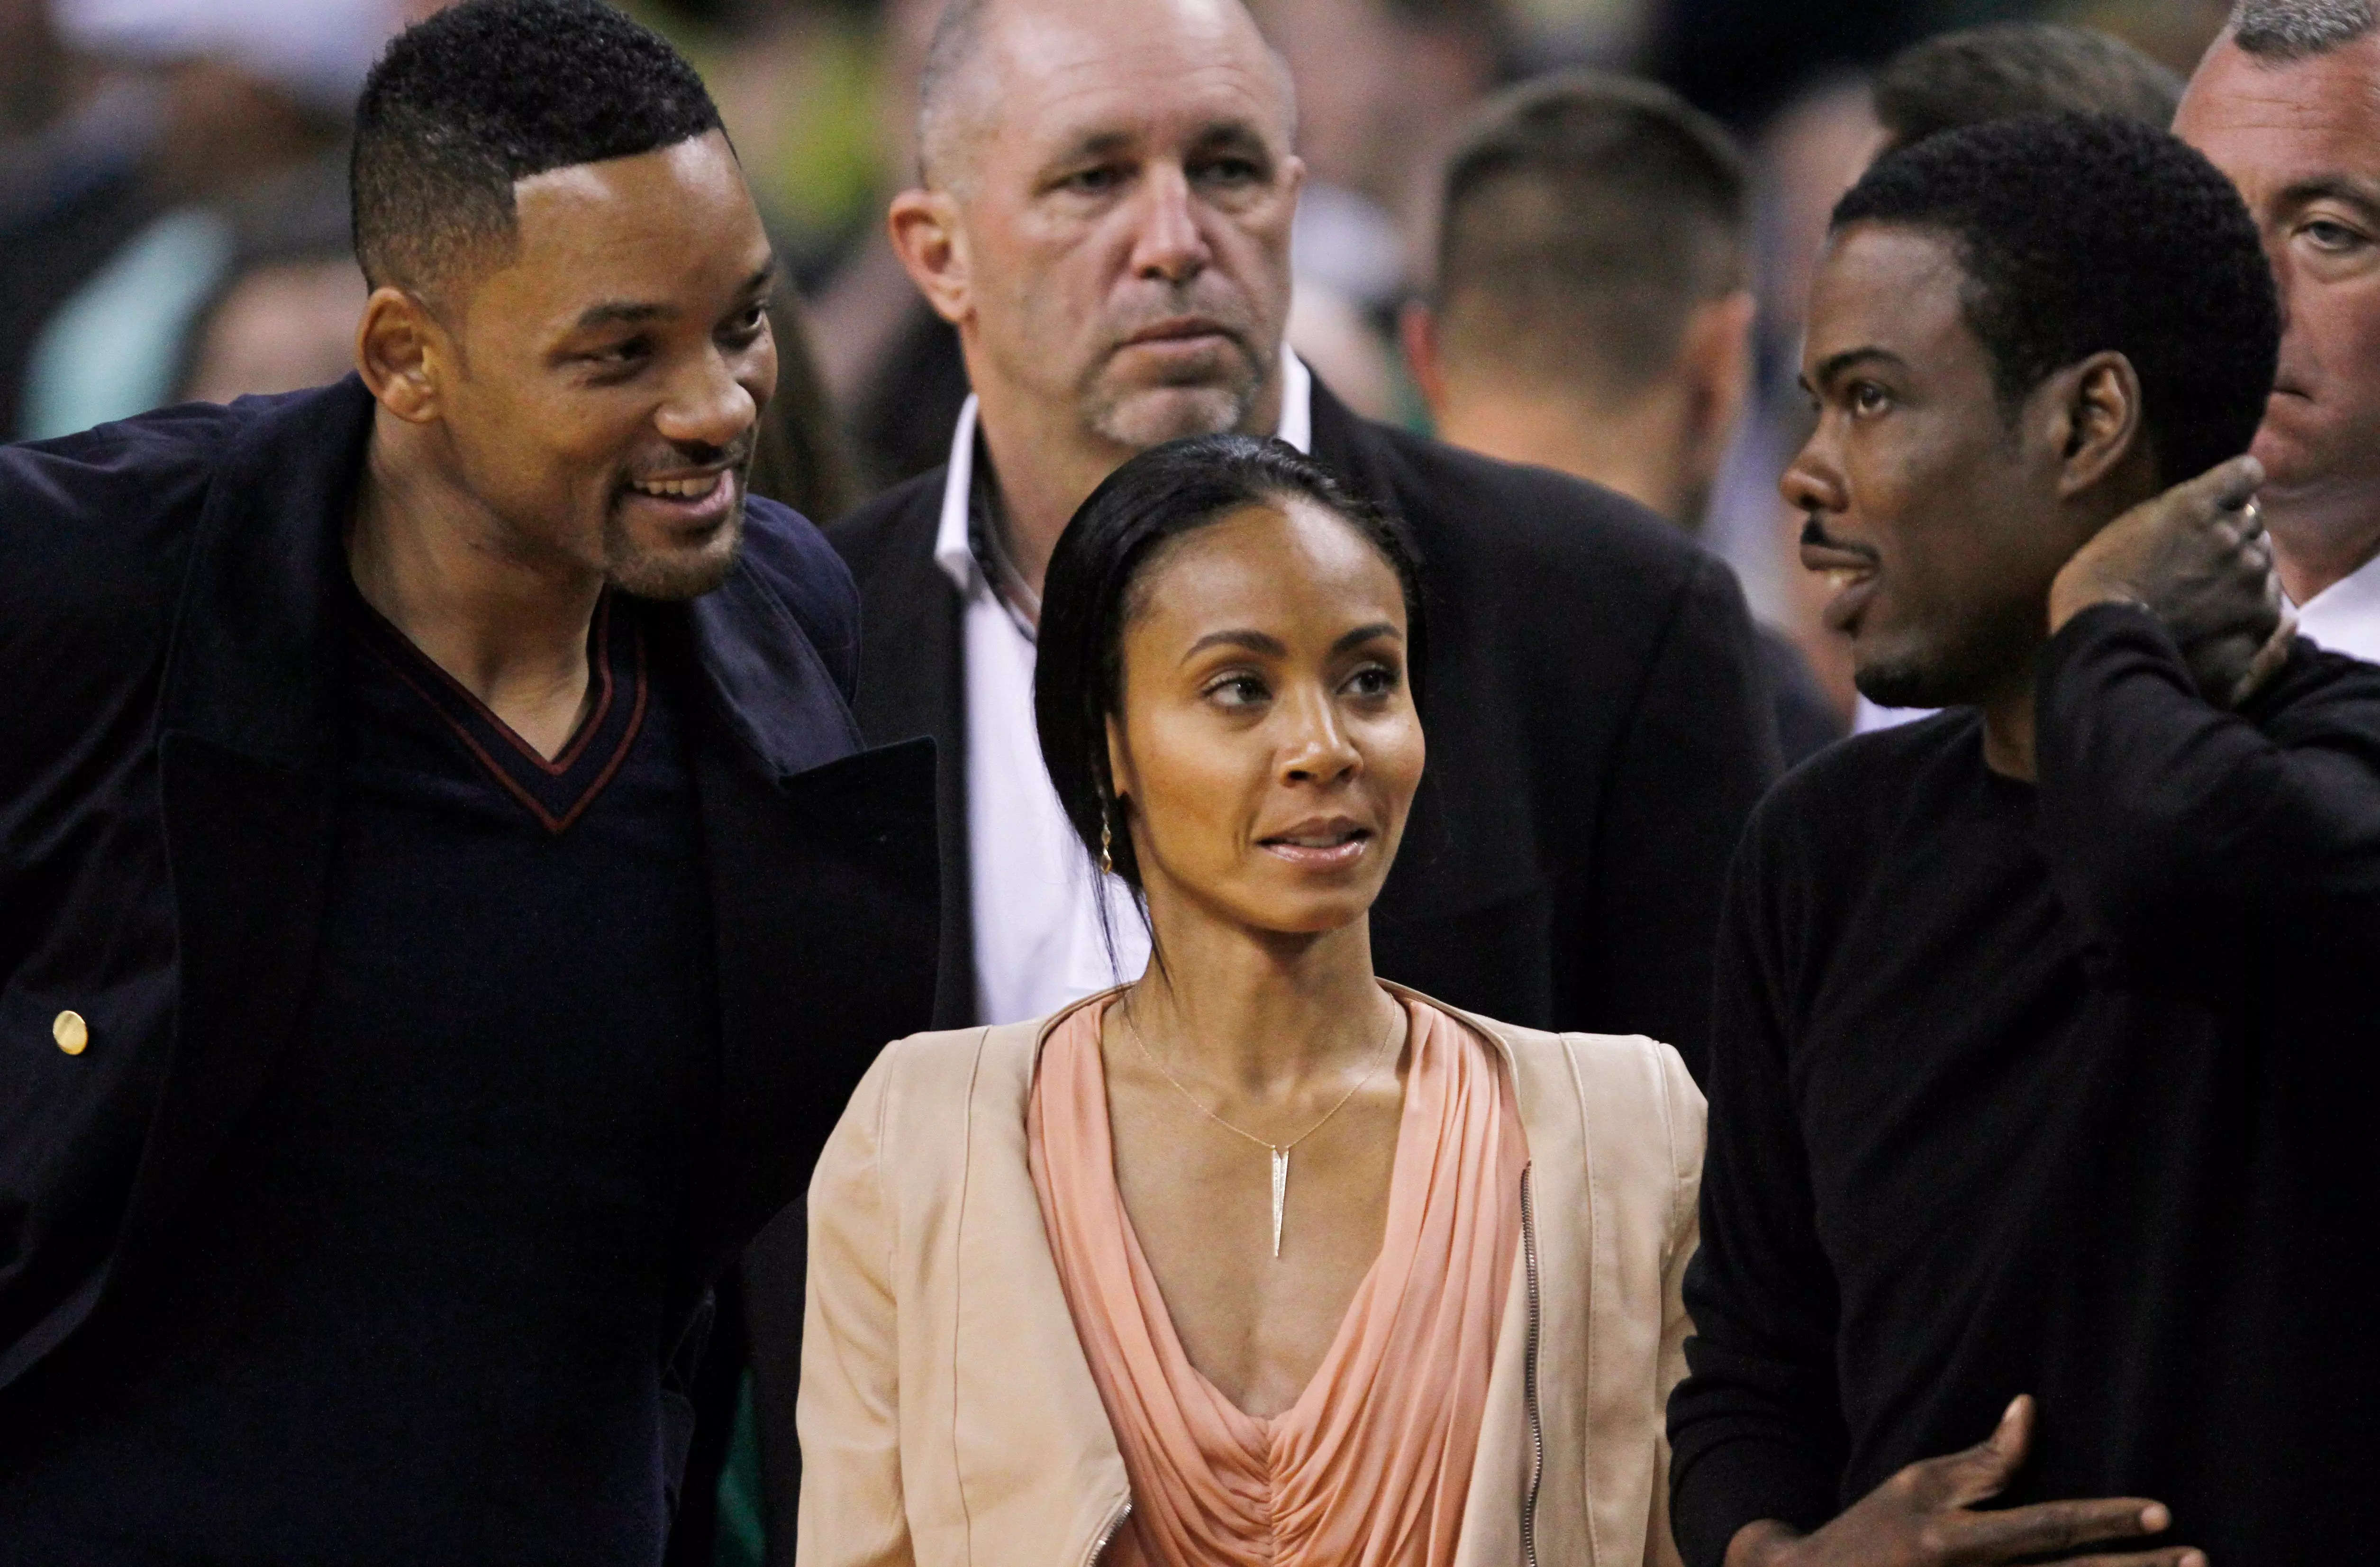 Will Smith, Jada Pinkett Smith, and Chris Rock courtside at a basketball game in May 2012.